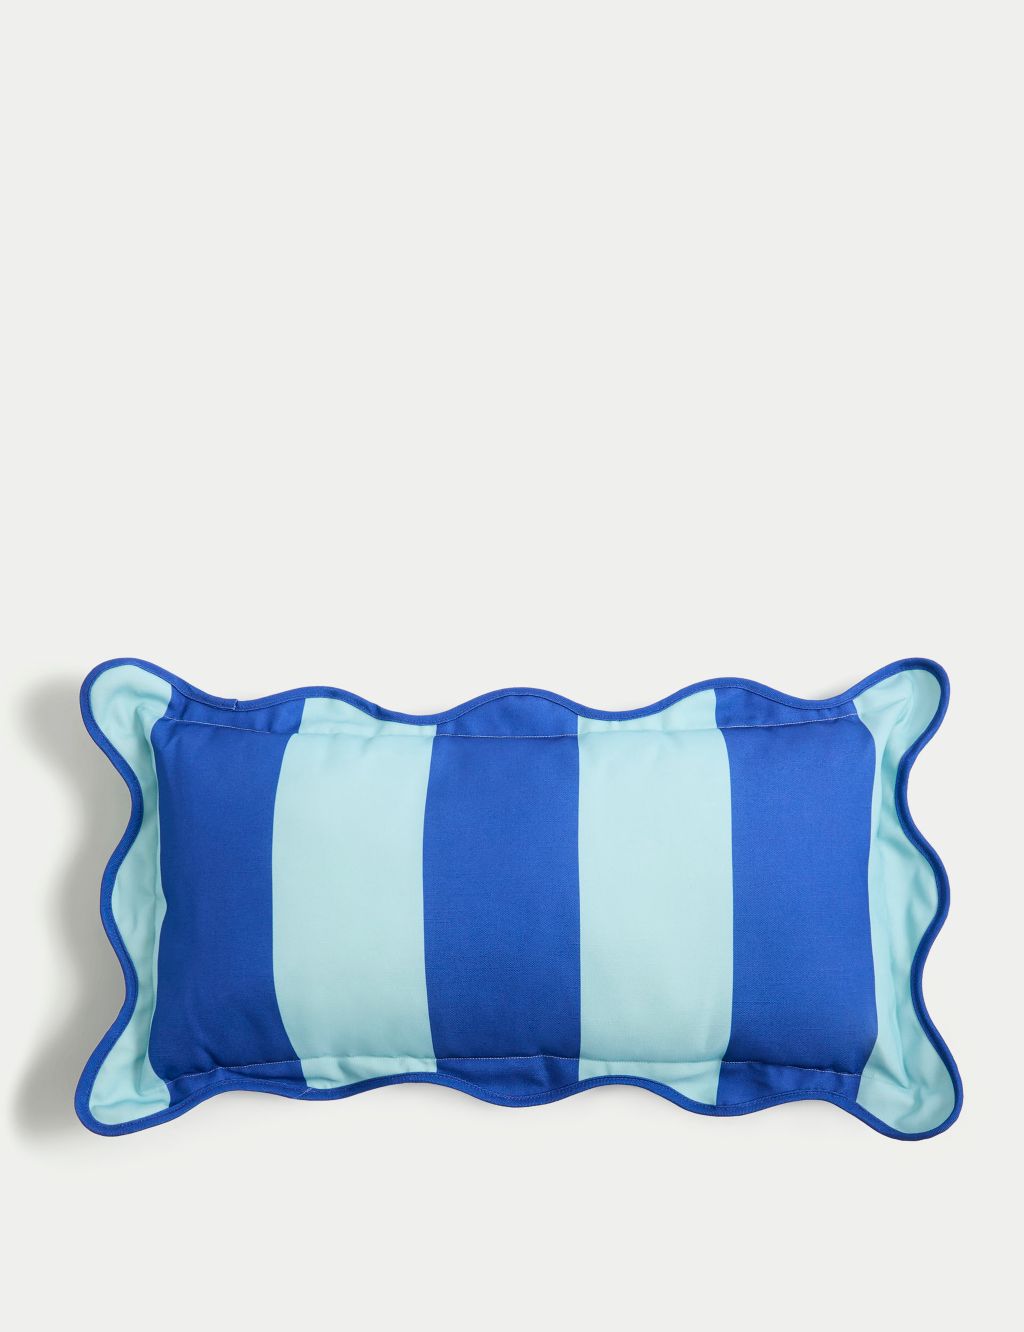 Striped Outdoor Bolster Cushion